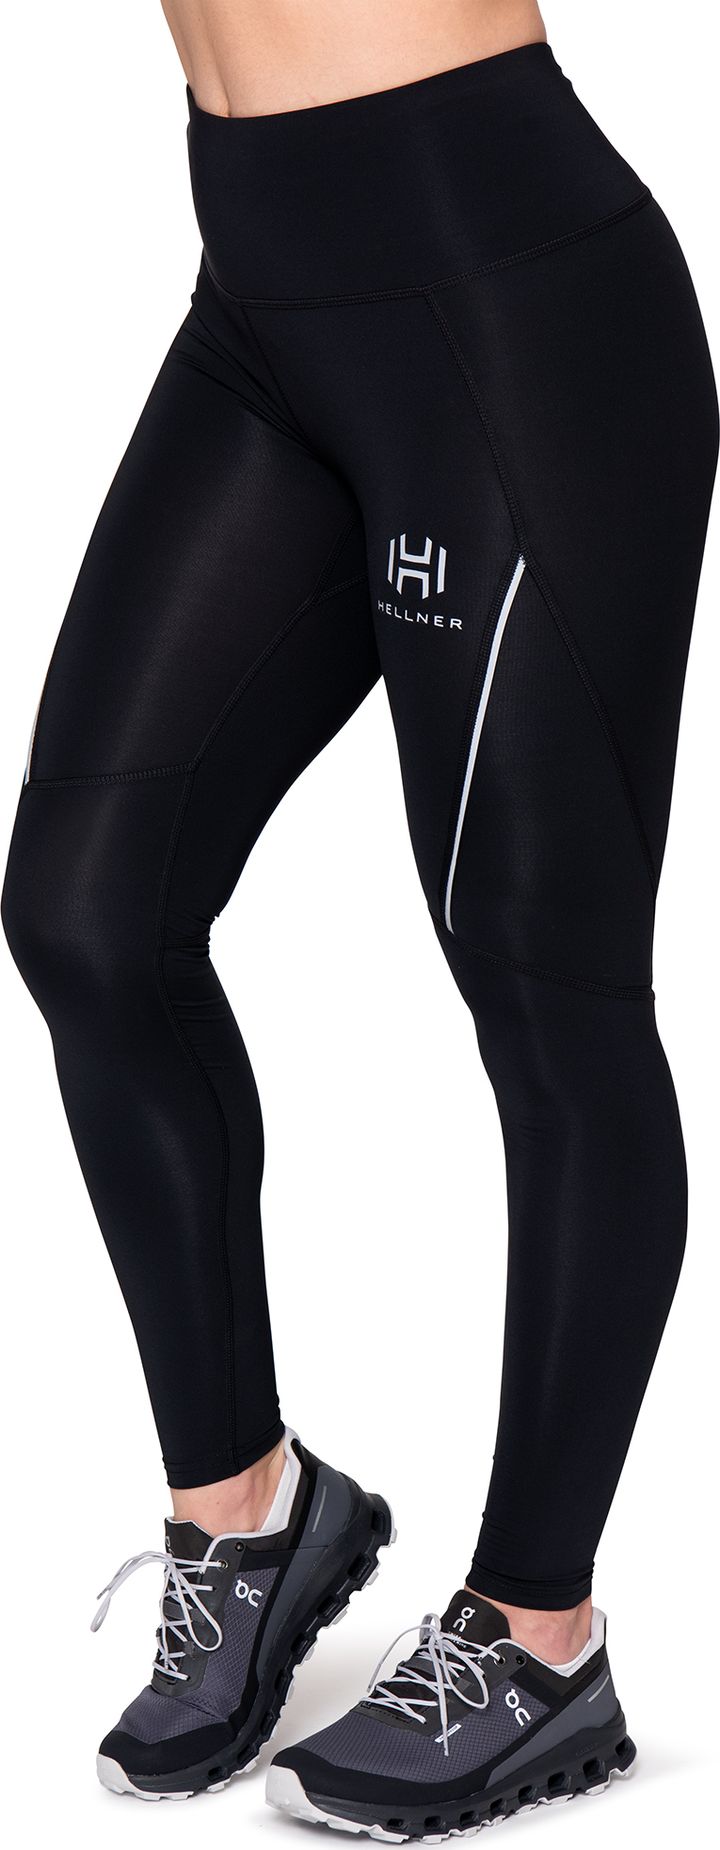 Compression Tights, Buy Compression Tights here